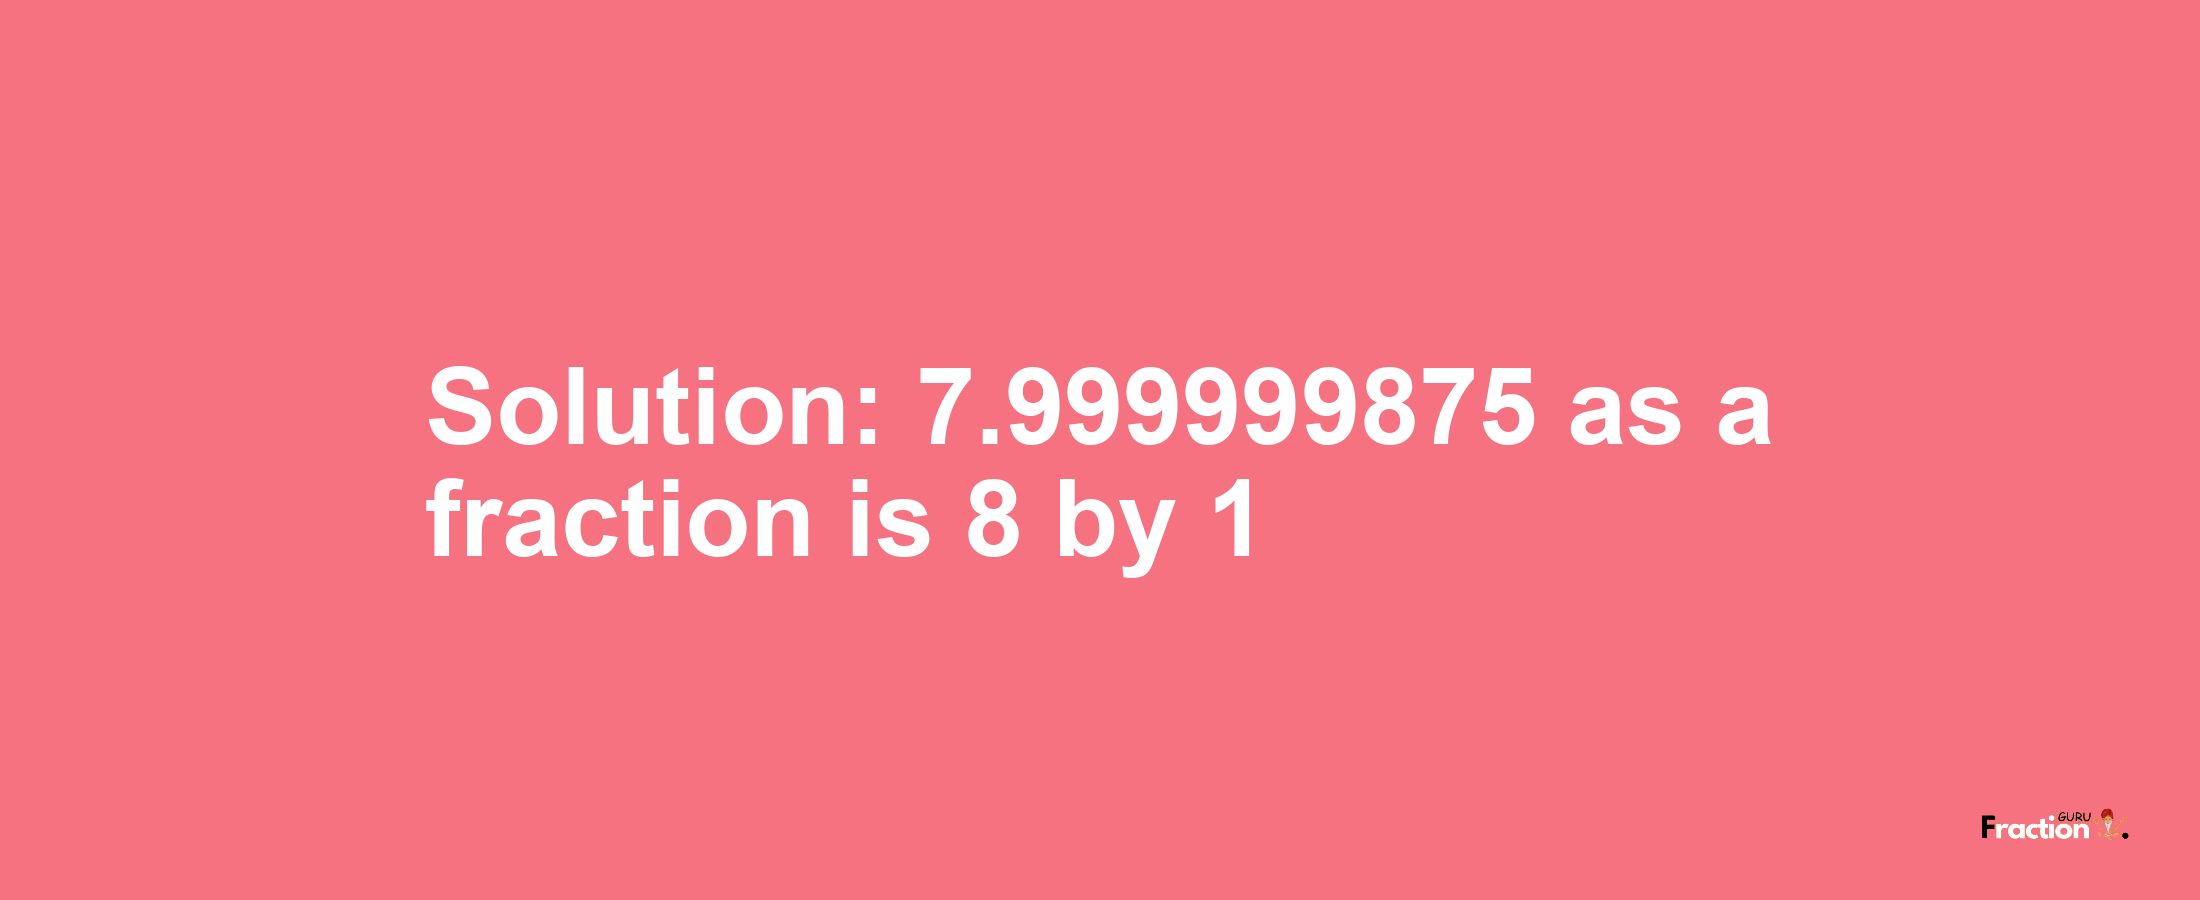 Solution:7.999999875 as a fraction is 8/1